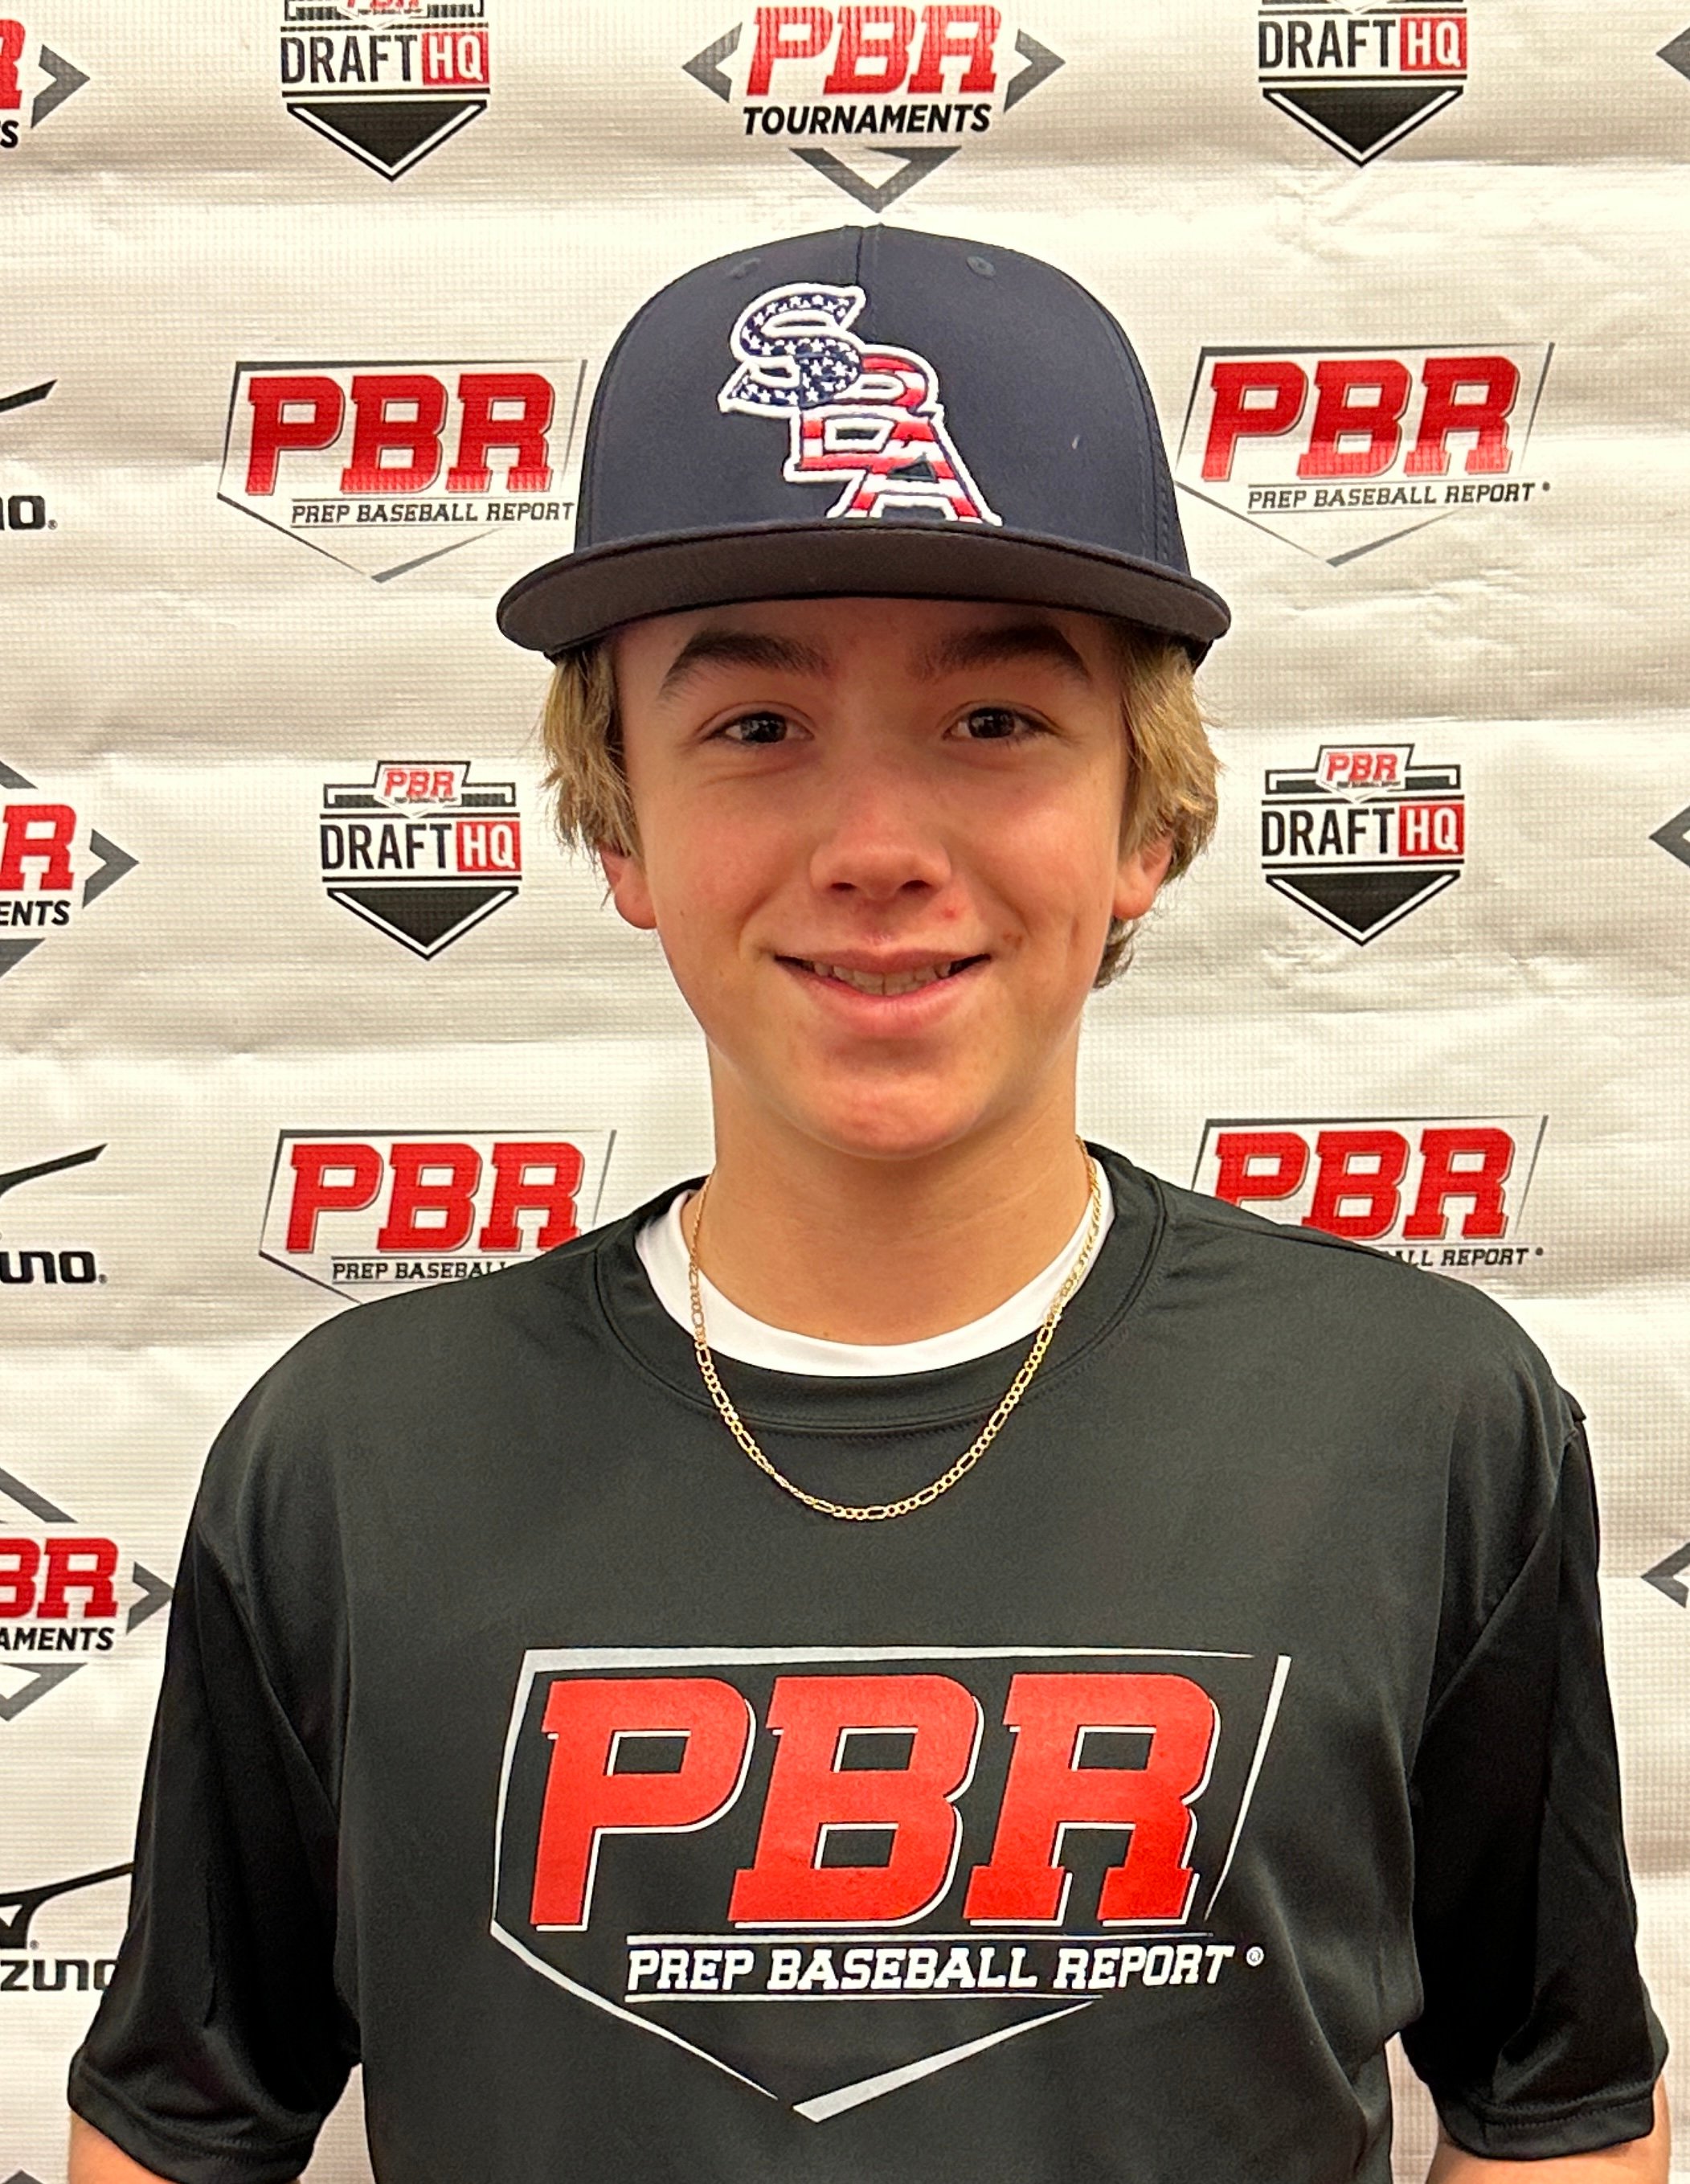 PBR Pennsylvania on X: Top Fastball Velos From tonight's PA